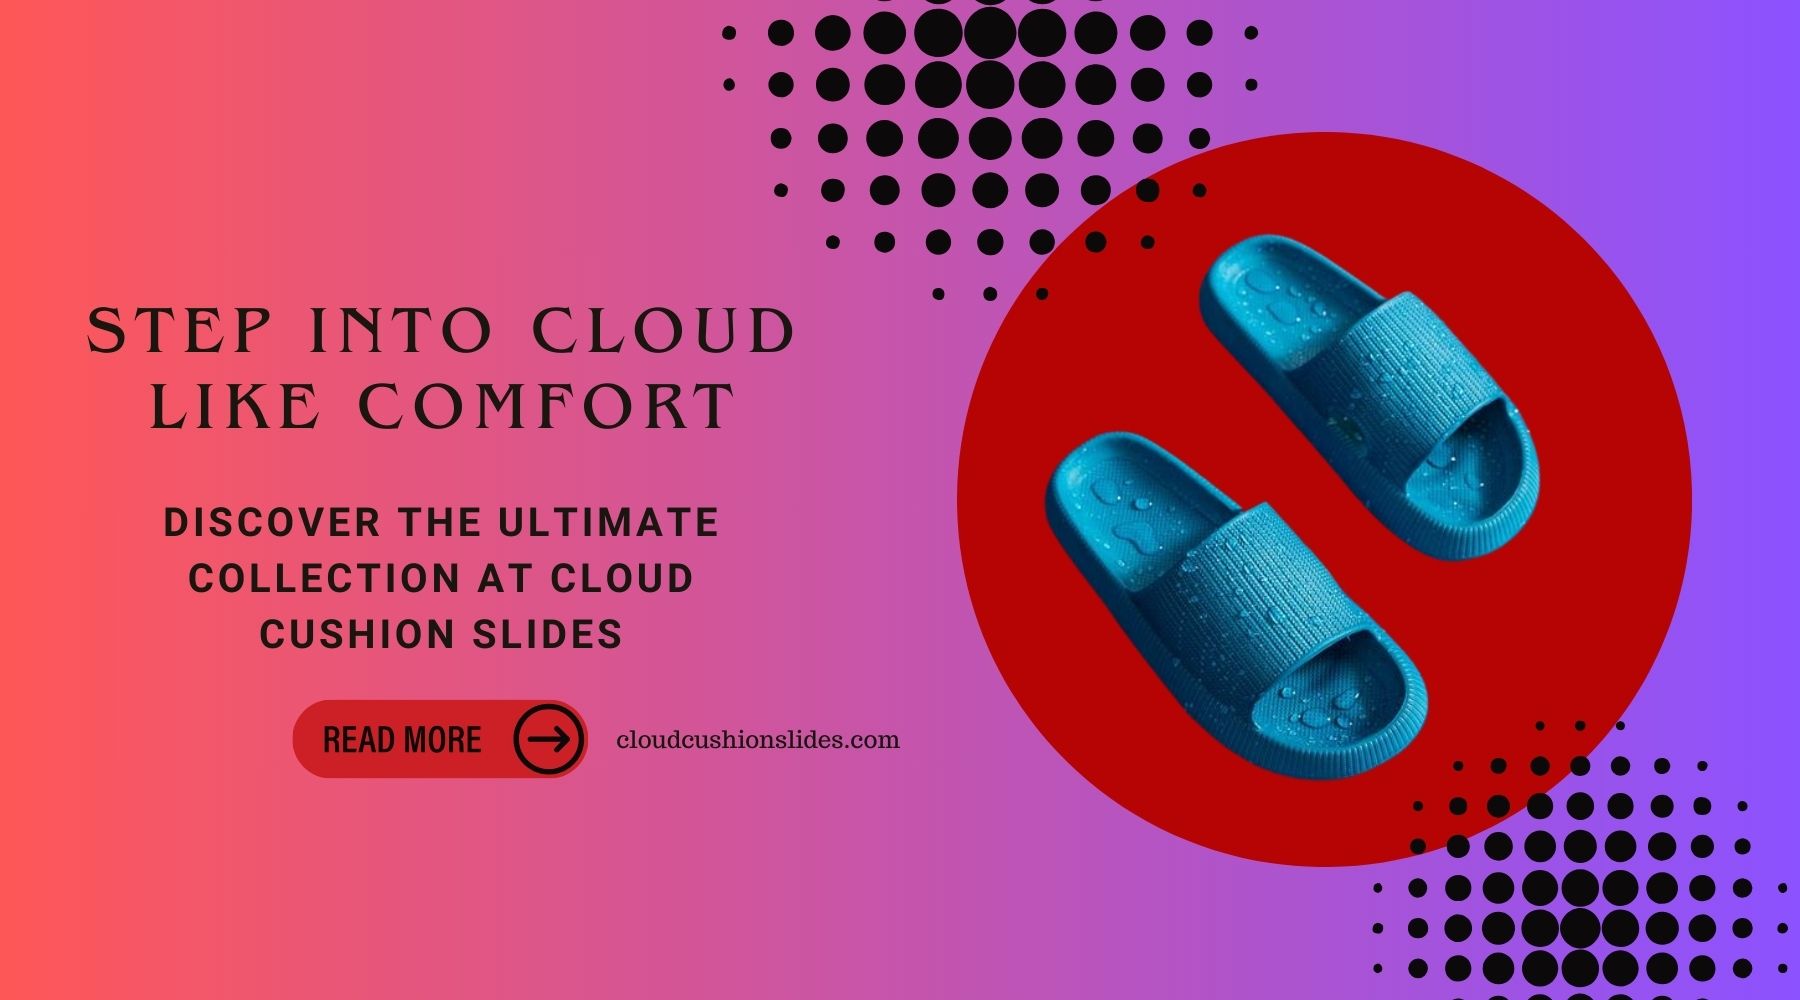 Step into Cloud-like Comfort Discover the Ultimate Collection at Cloud Cushion Slides